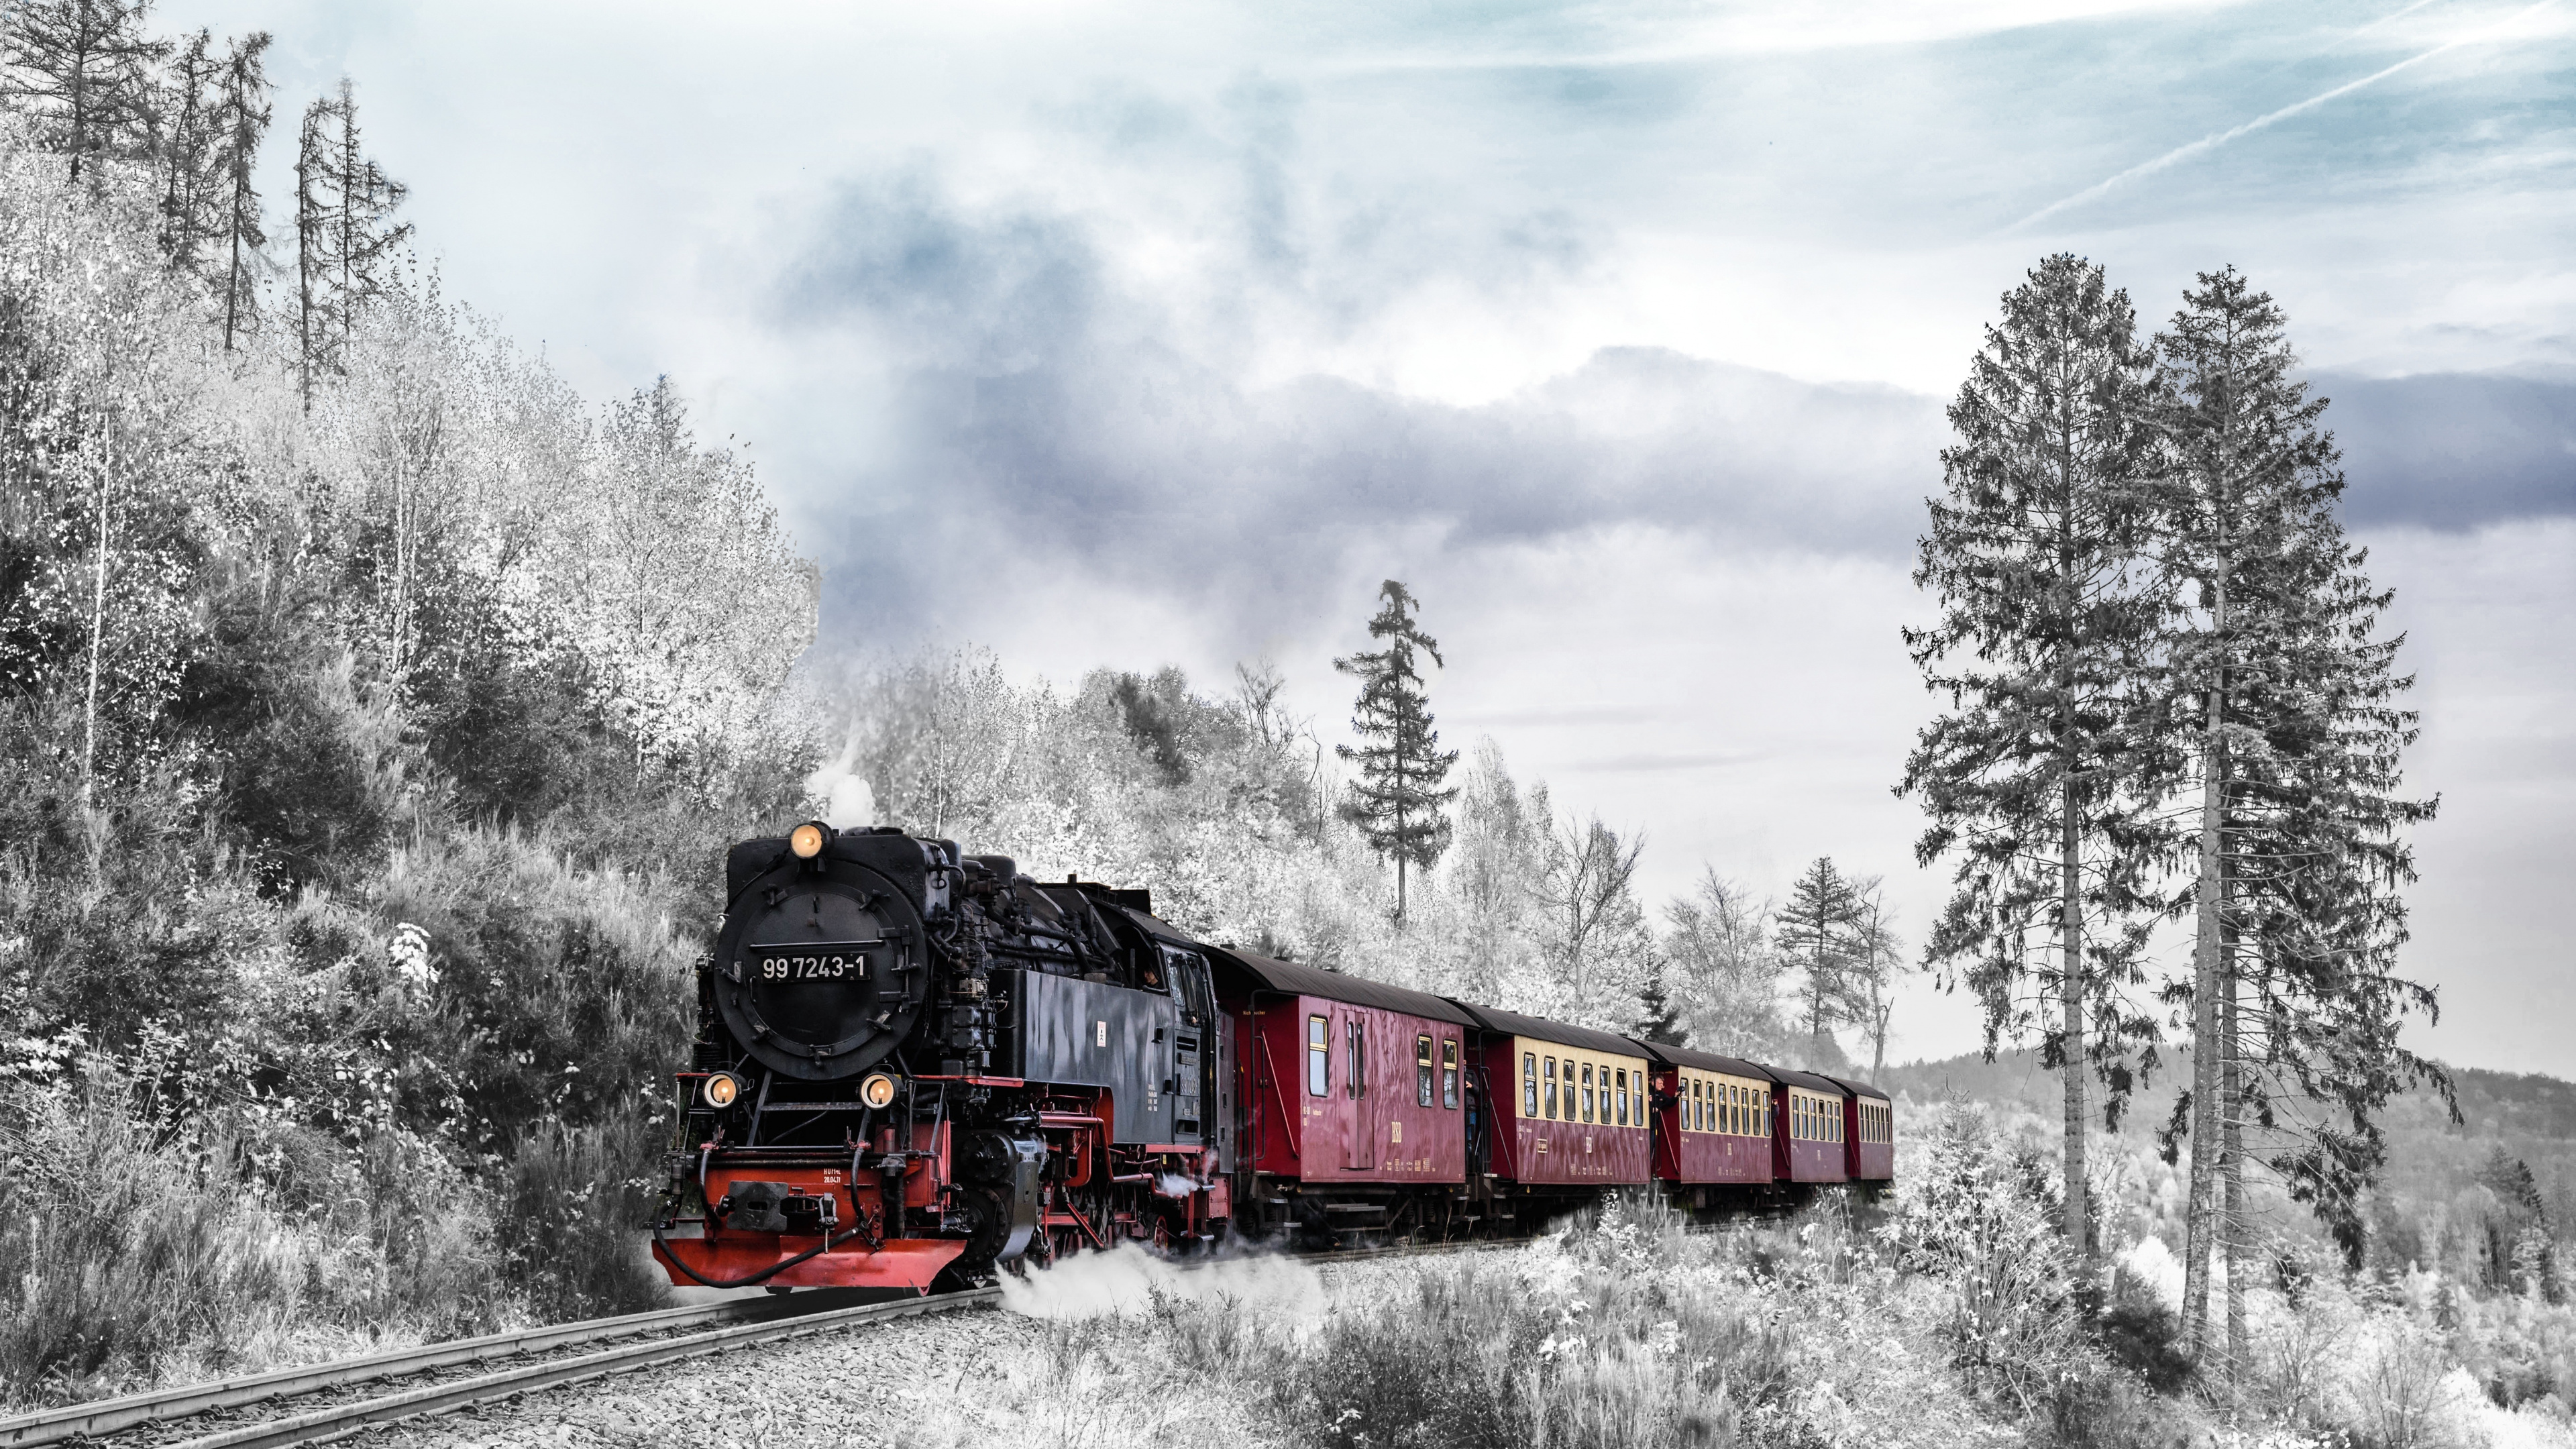 Red and Black Train on Rail Tracks Under Cloudy Sky. Wallpaper in 3840x2160 Resolution